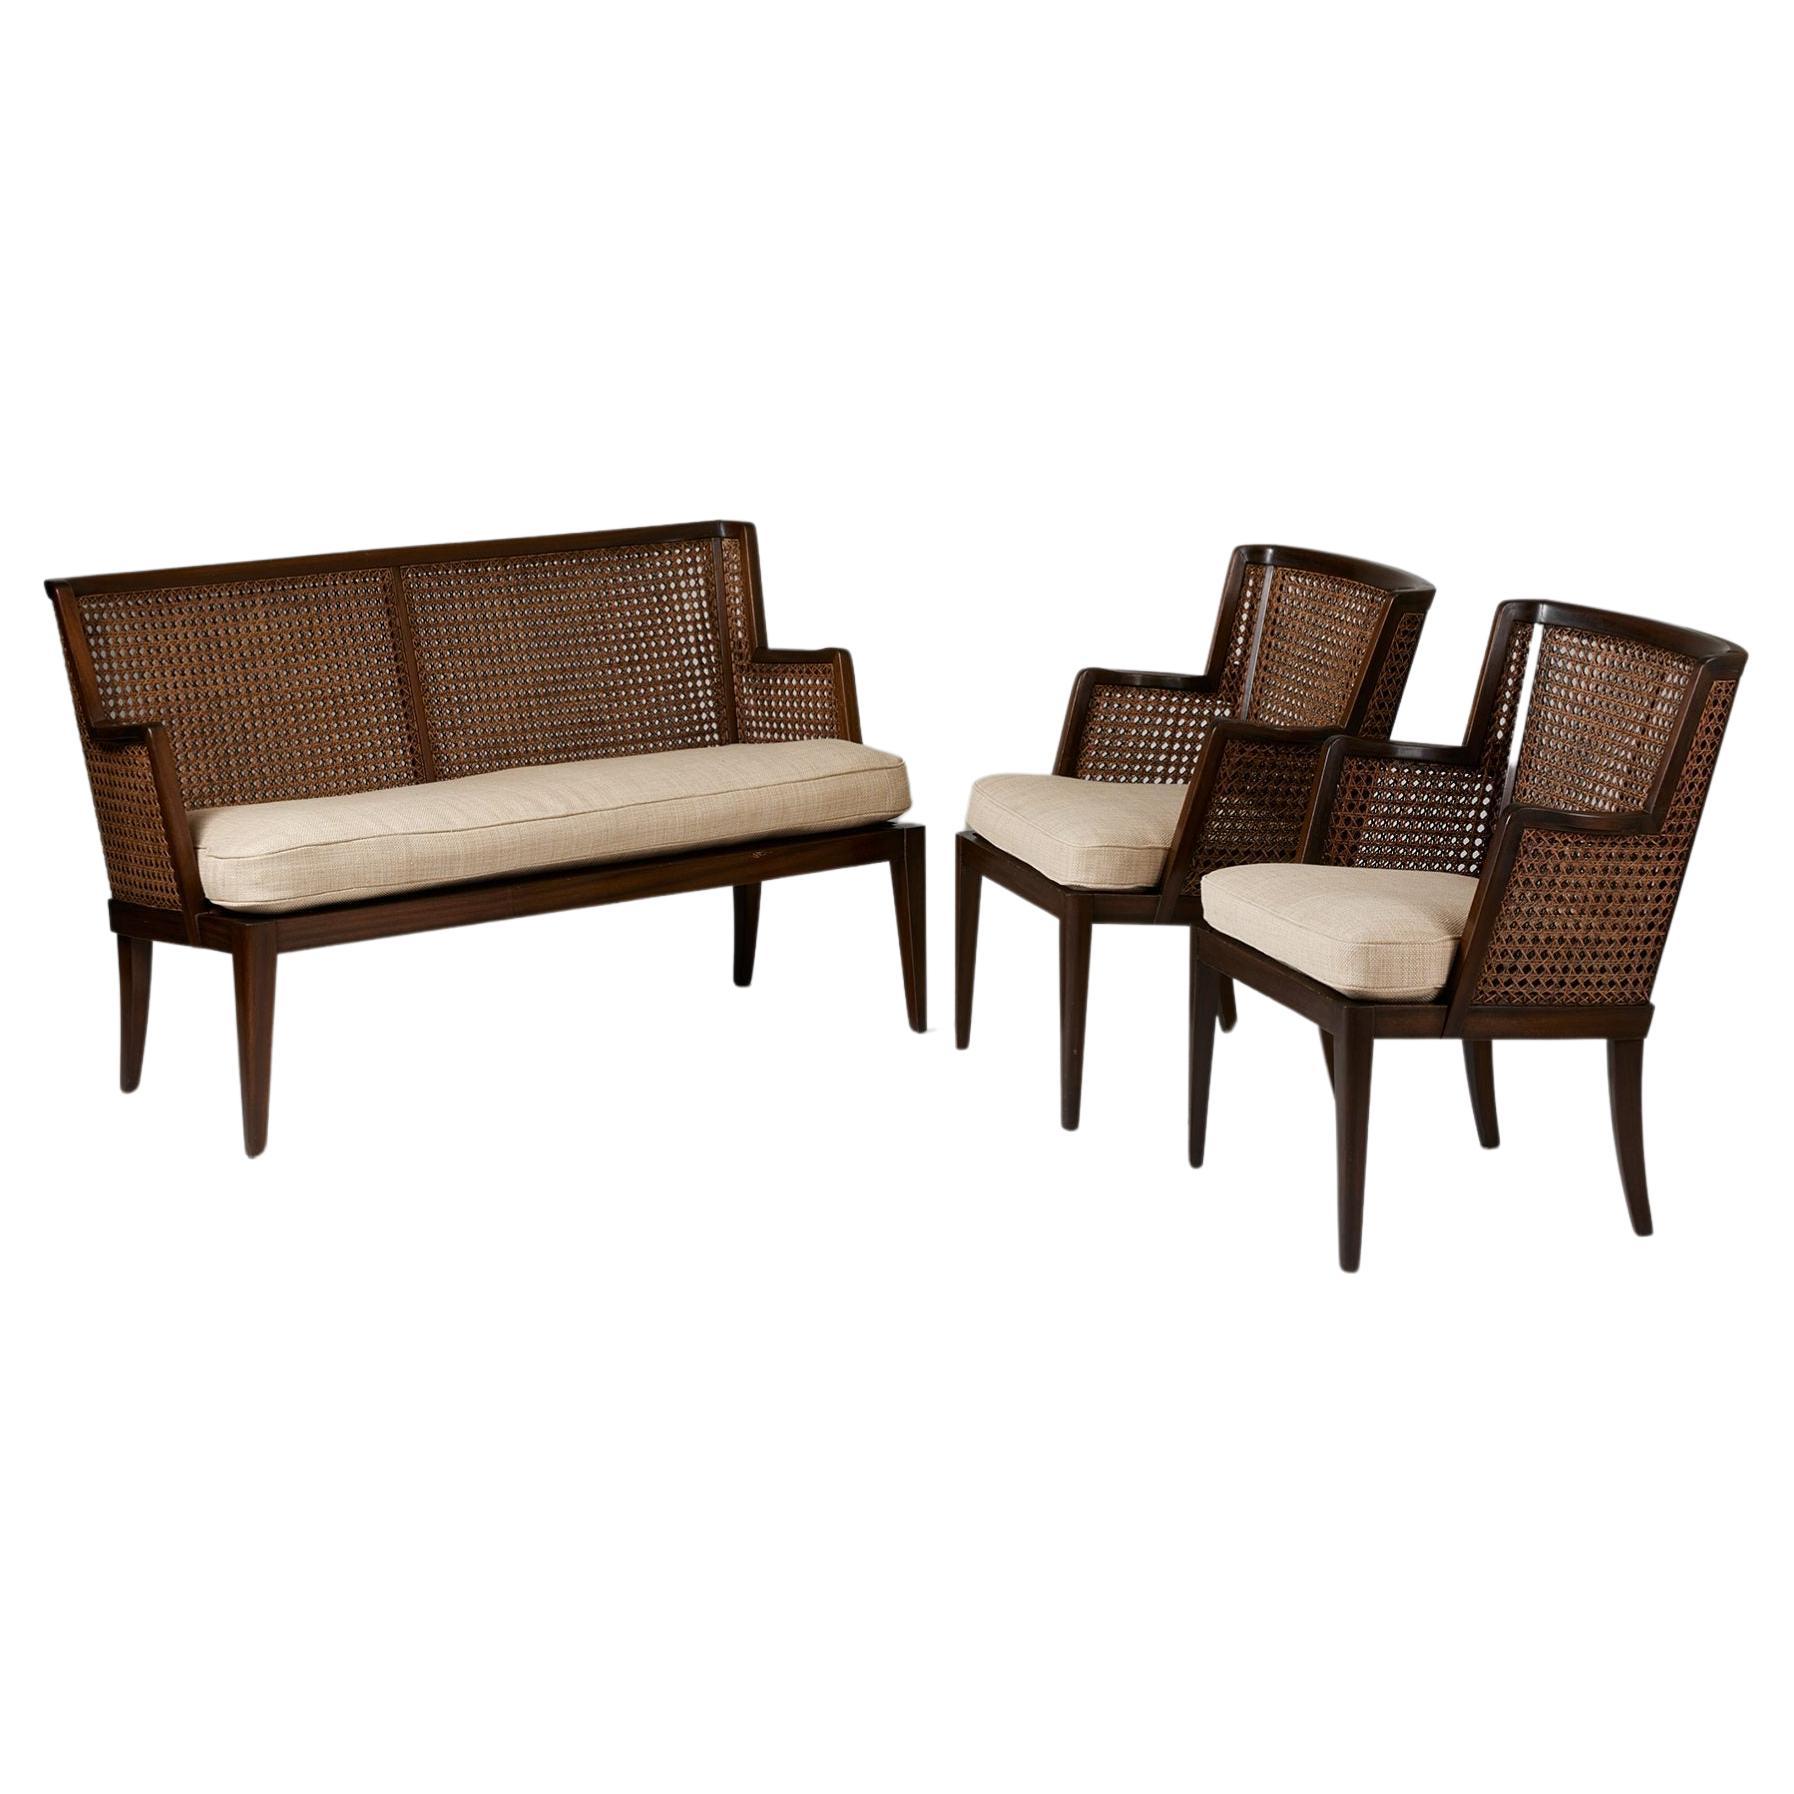 A pair of armchairs and sofa, anoynmous for Paul Boman, Finland, 1930s, rattan